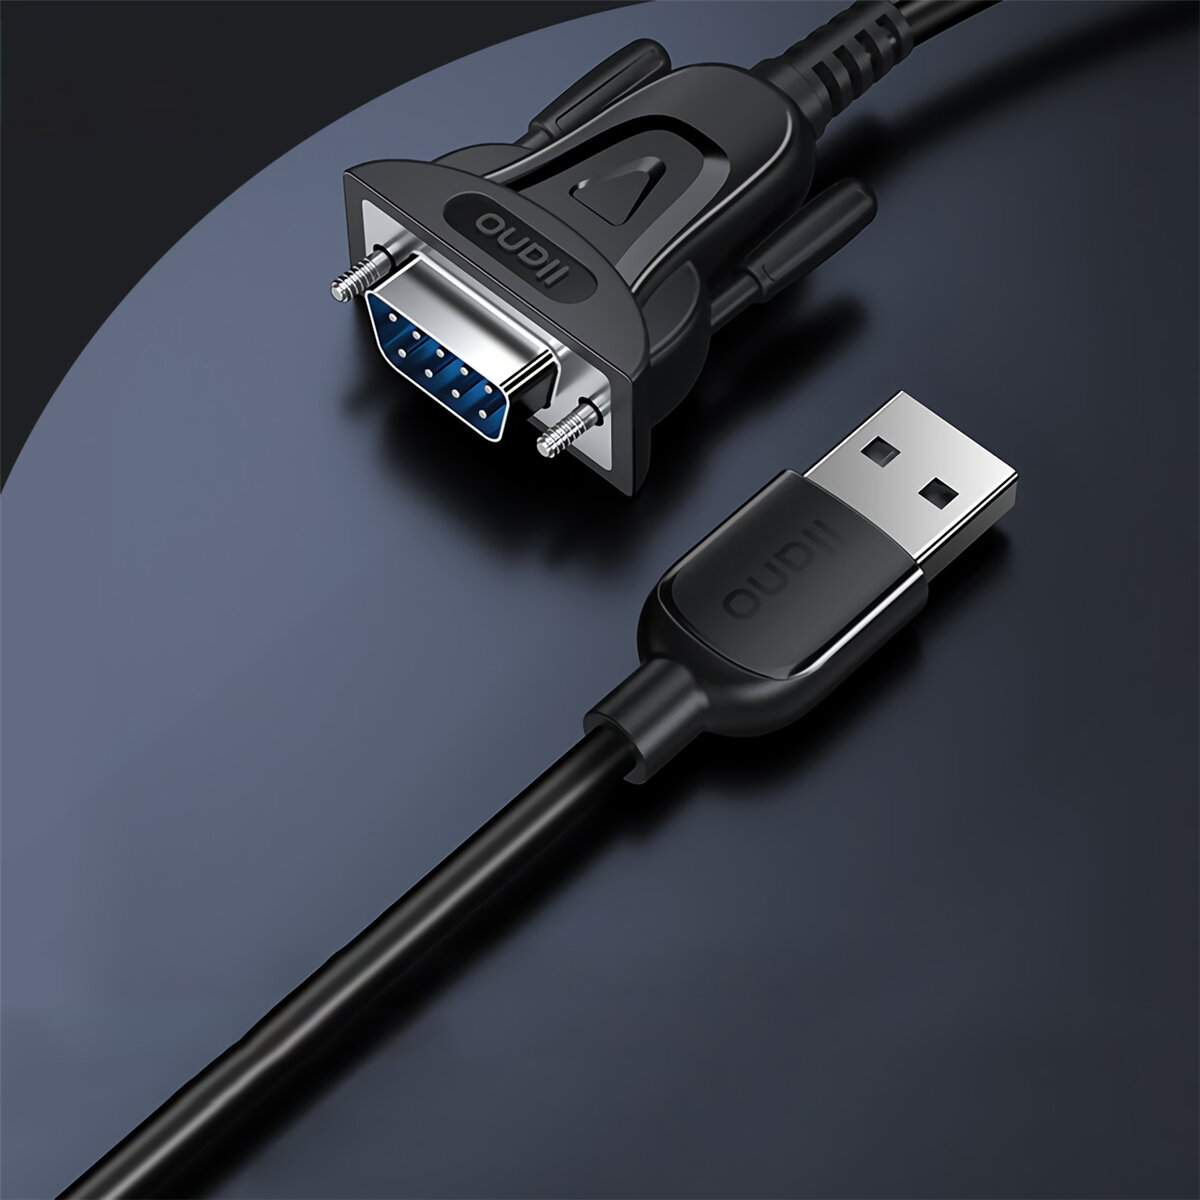 llano USB to RS232 Serial Cable USB to DB 9Pin Cable Adapter PL2303 Chipfor Windows 7 8.1 XP Vista for Mac OS USB RS23